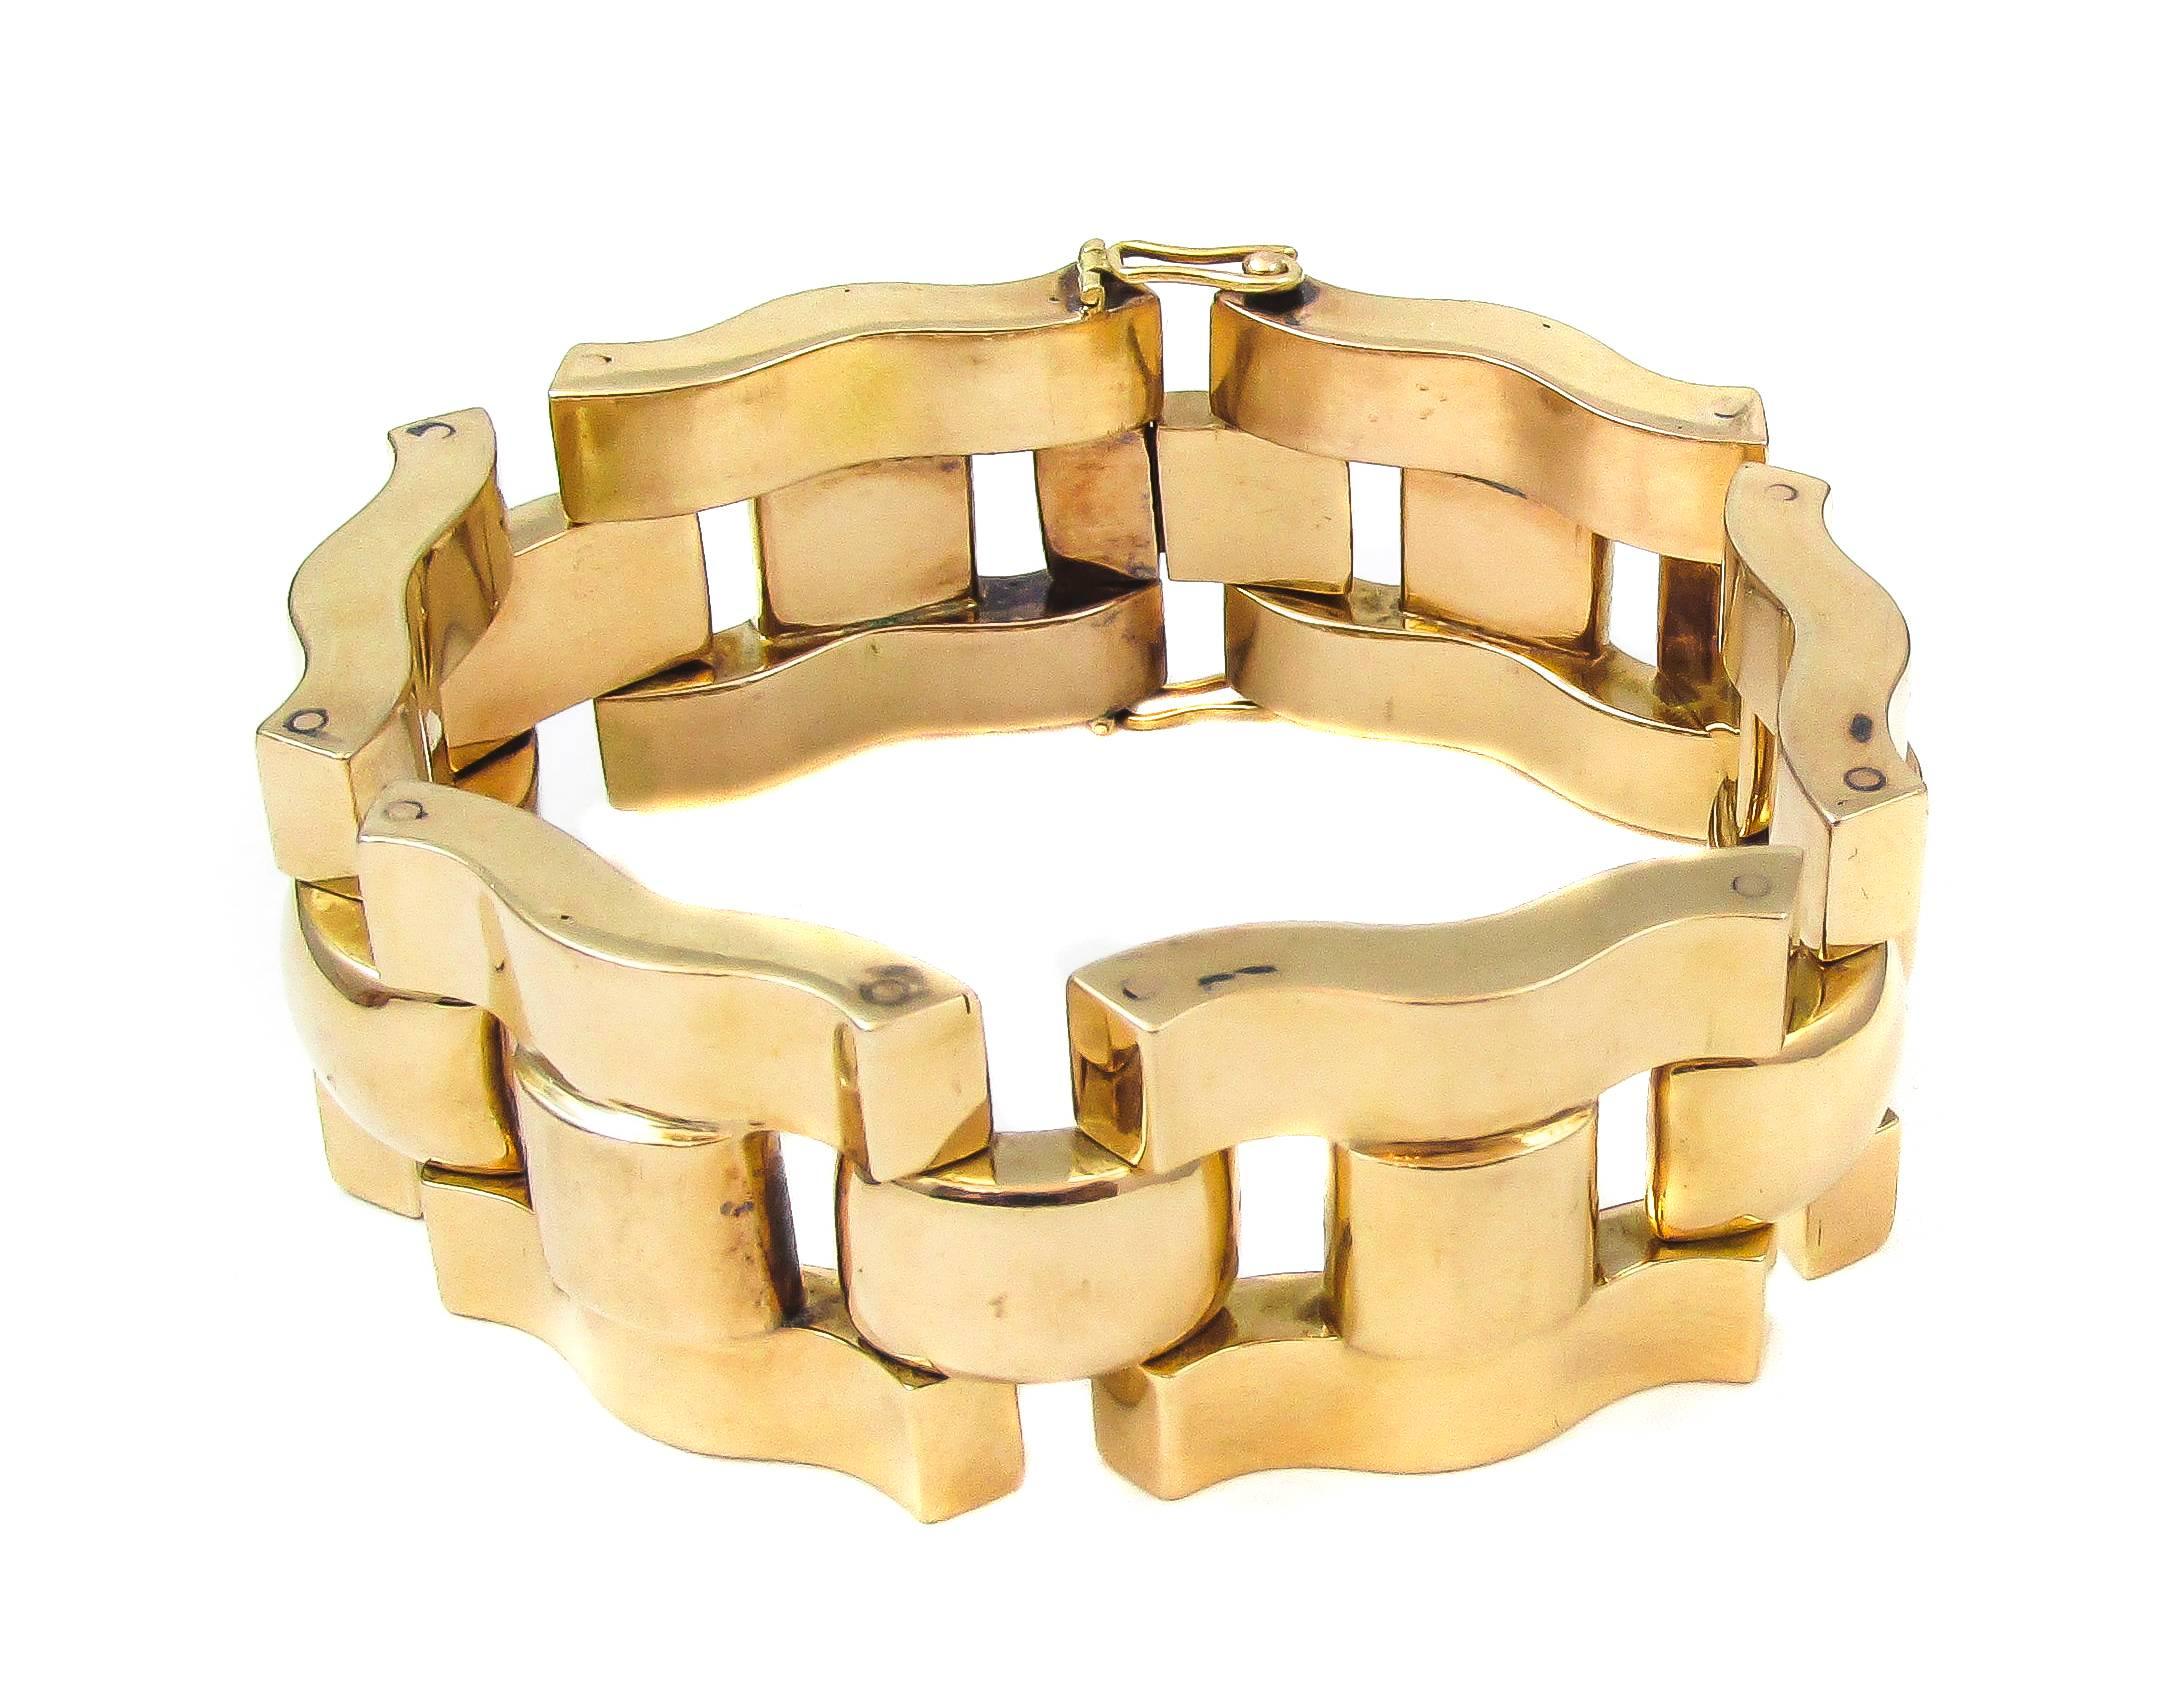 A beautiful and substantial 18K yellow gold retro link bracelet. Solidly swirled geometrical links make for smooth movement on the wrist, displaying the boldly detailed, curved and rounded elements. French jewelers were always known and favored for